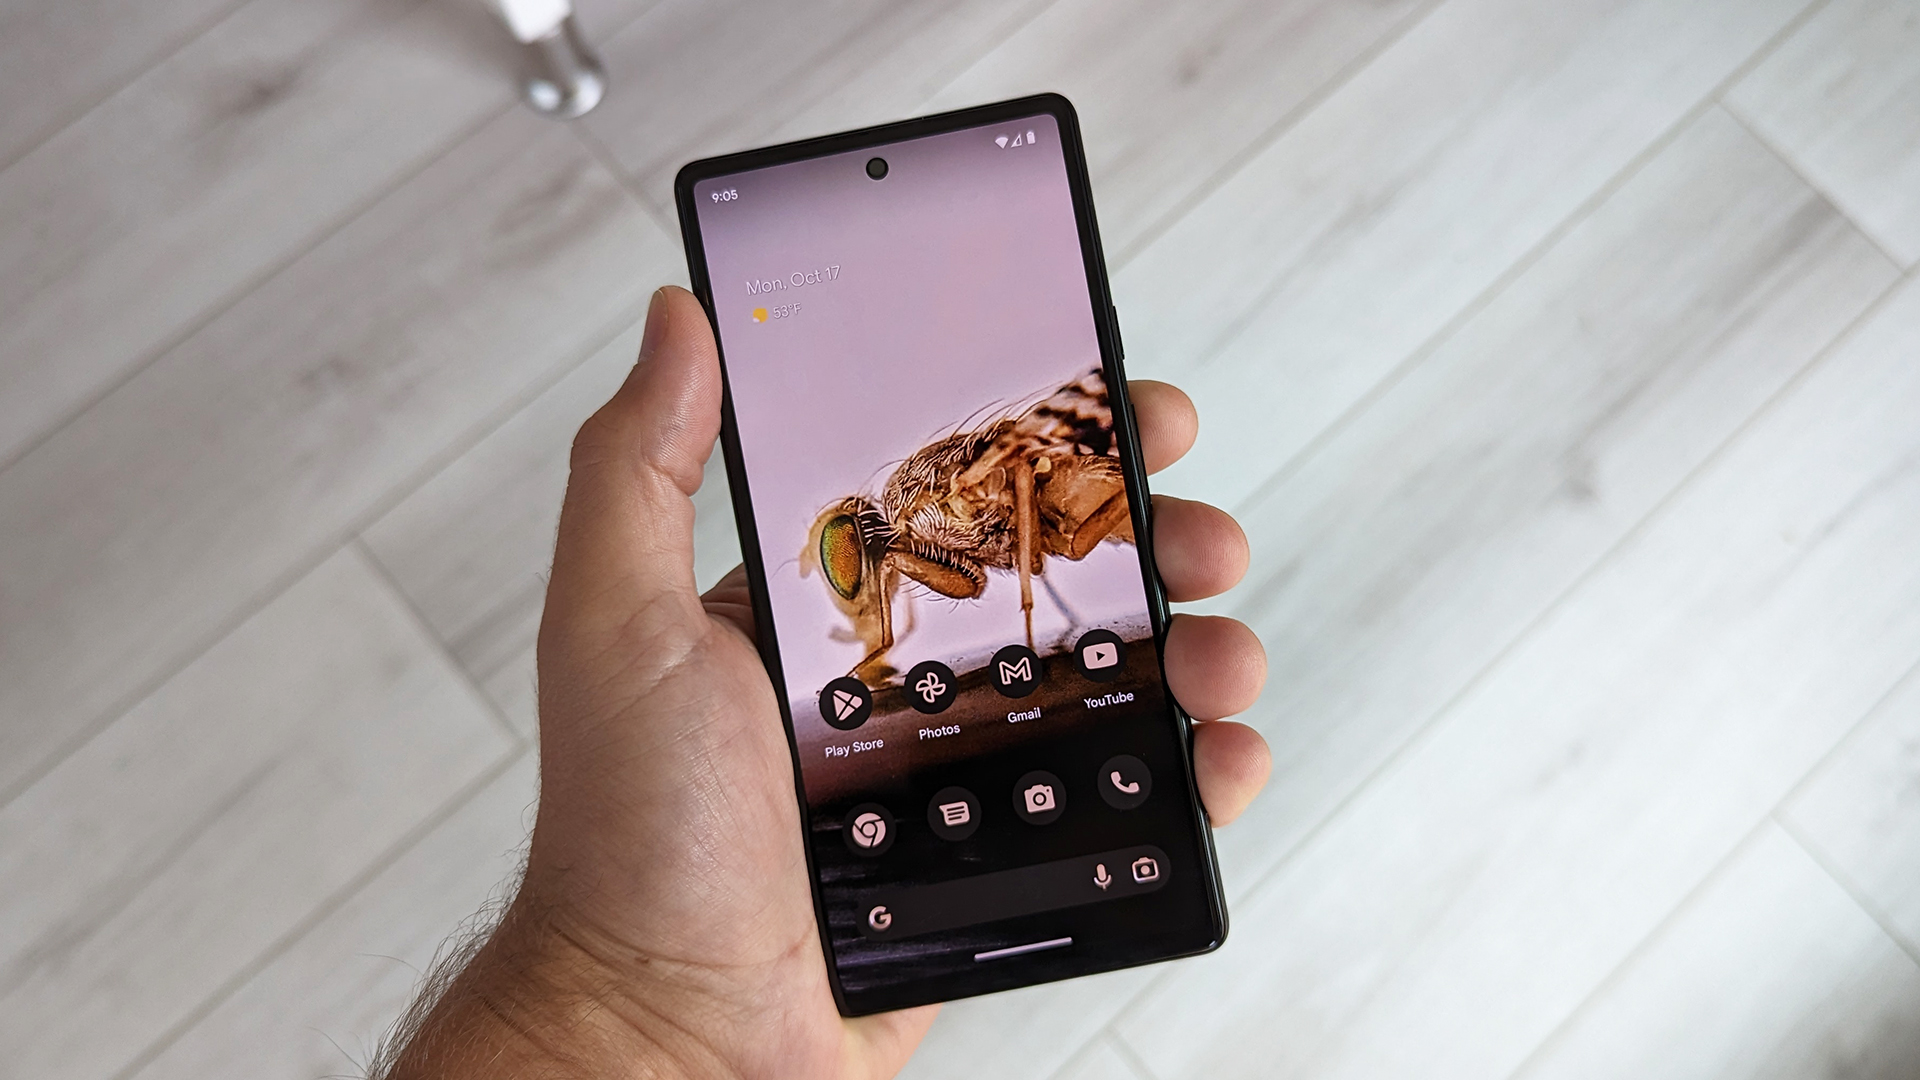 Wallpaper Wednesday: Android wallpapers 2022-10-19 - Android Authority